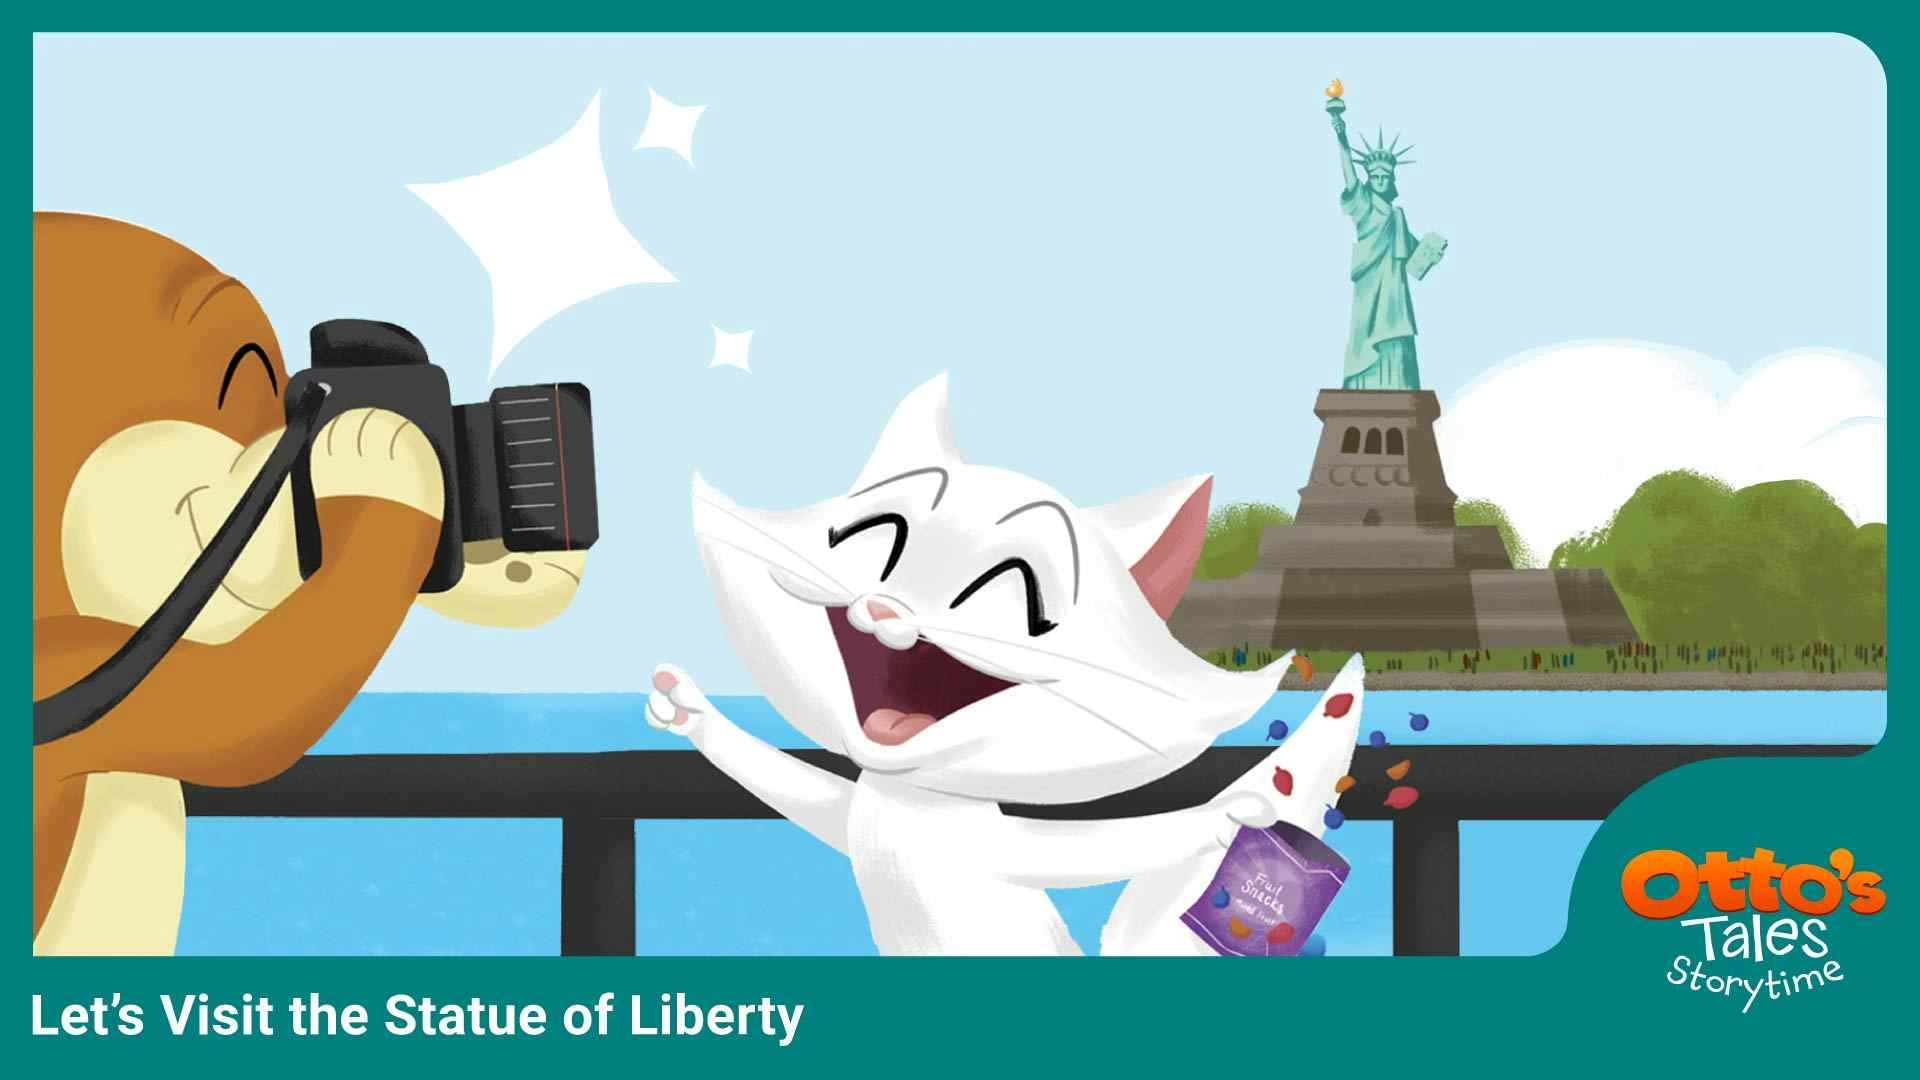 Let's Visit the Statue of Liberty